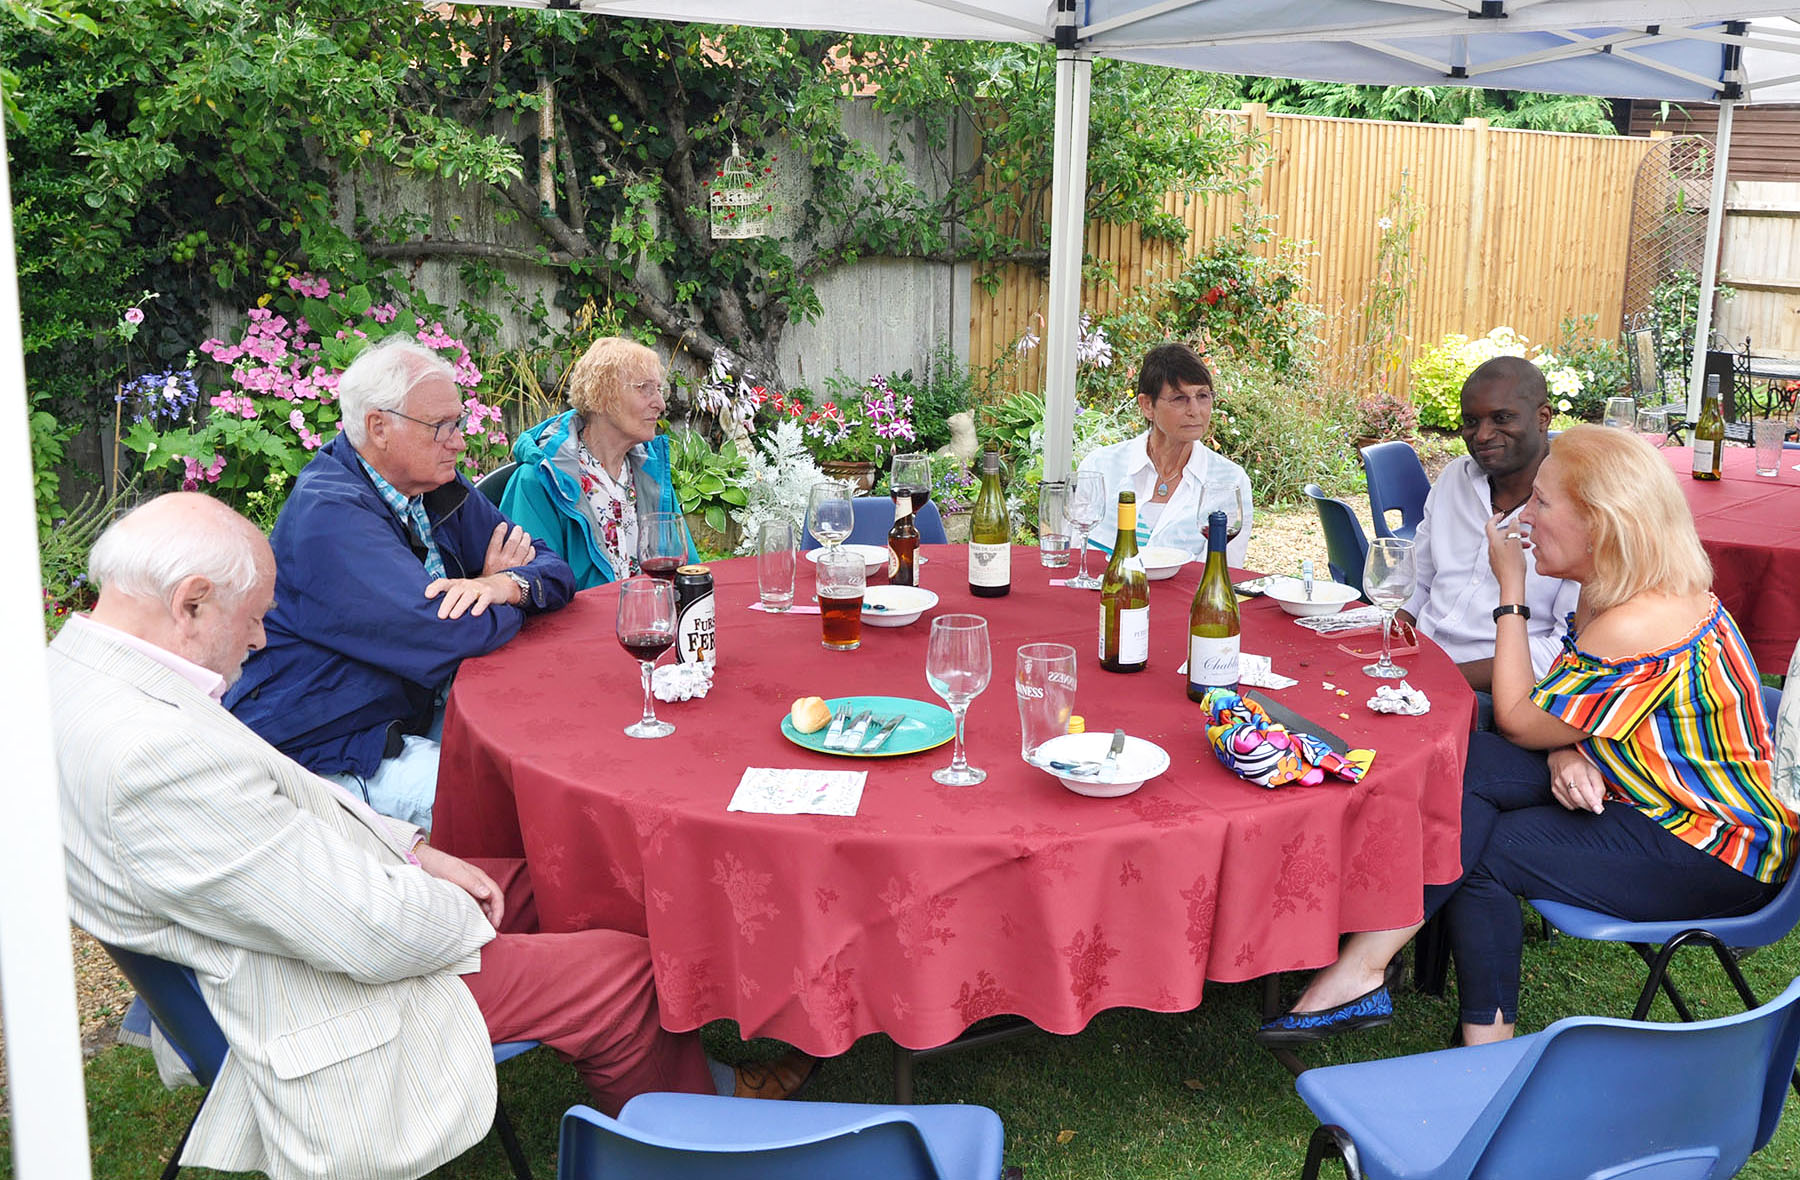 The Fourth Annual District Garden Party